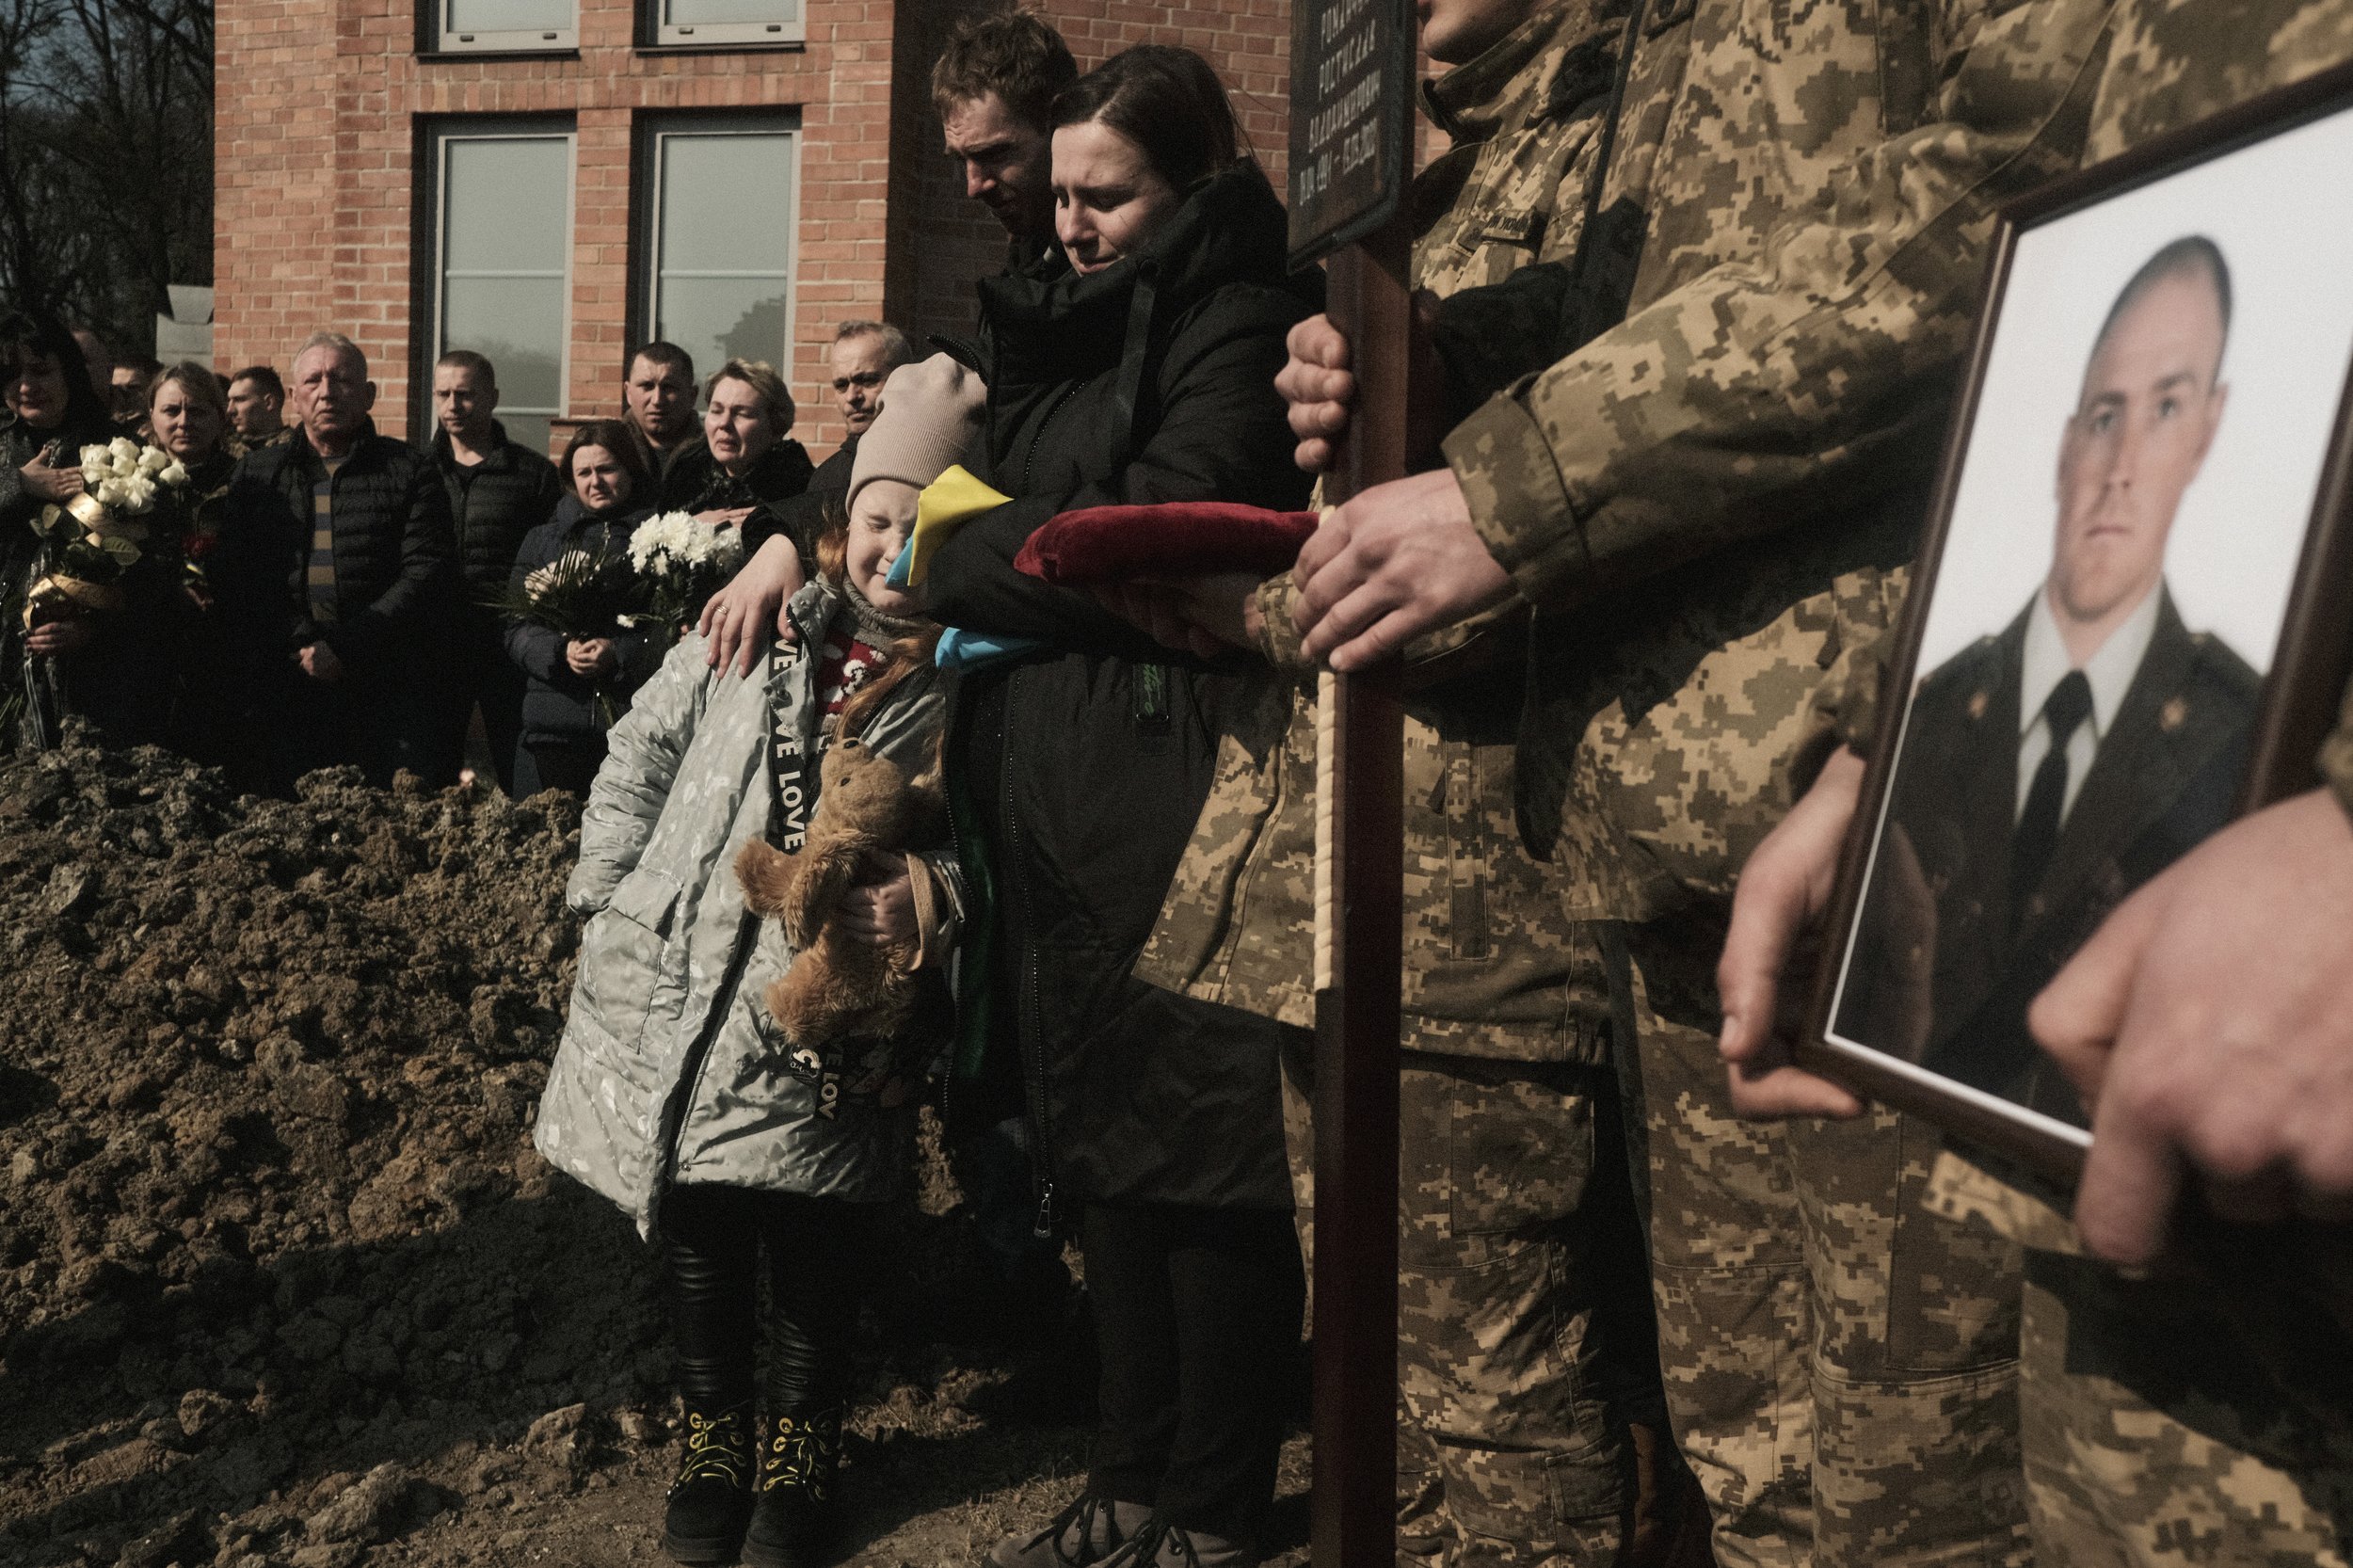  The daughter of Rostyslav Romanchuk, eight-year-old Viktoria, cries as her father's casket is lowered into his grave at the Lychakivske Cemetery in Lviv, Ukraine. Romanchuk was one of 35 killed in an airstrike on a military base near the Polish bord